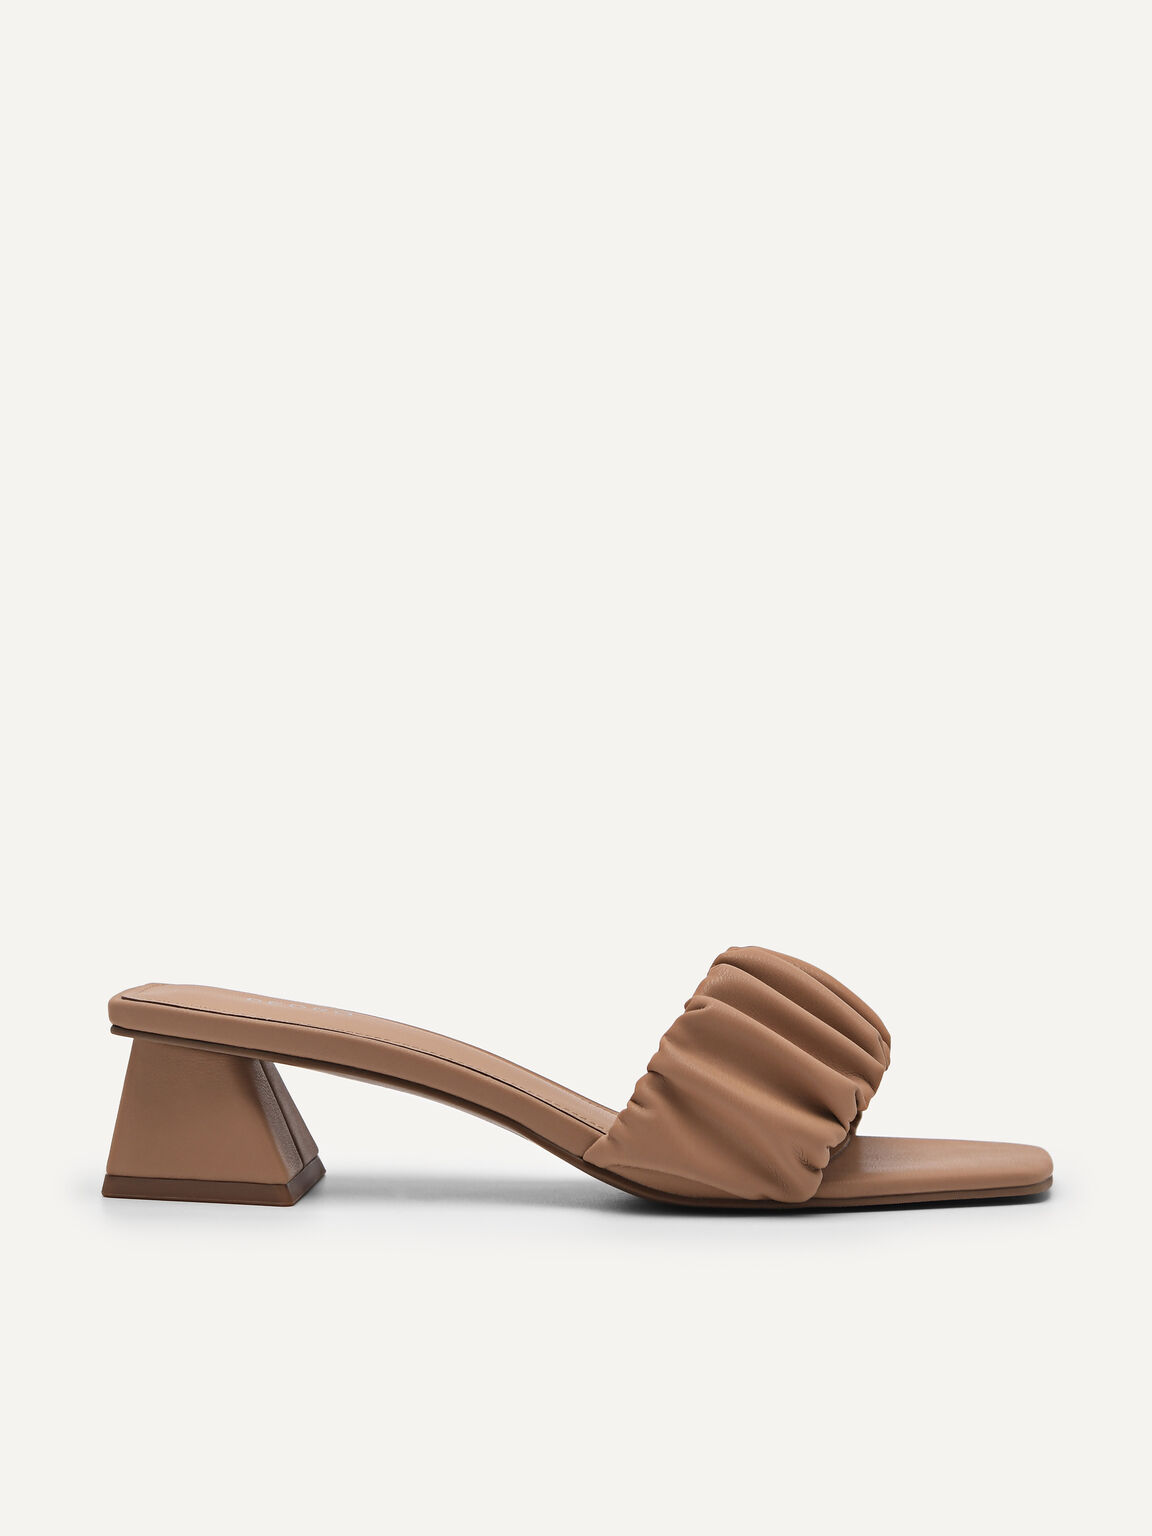 Ruched Heel Mules, Nude